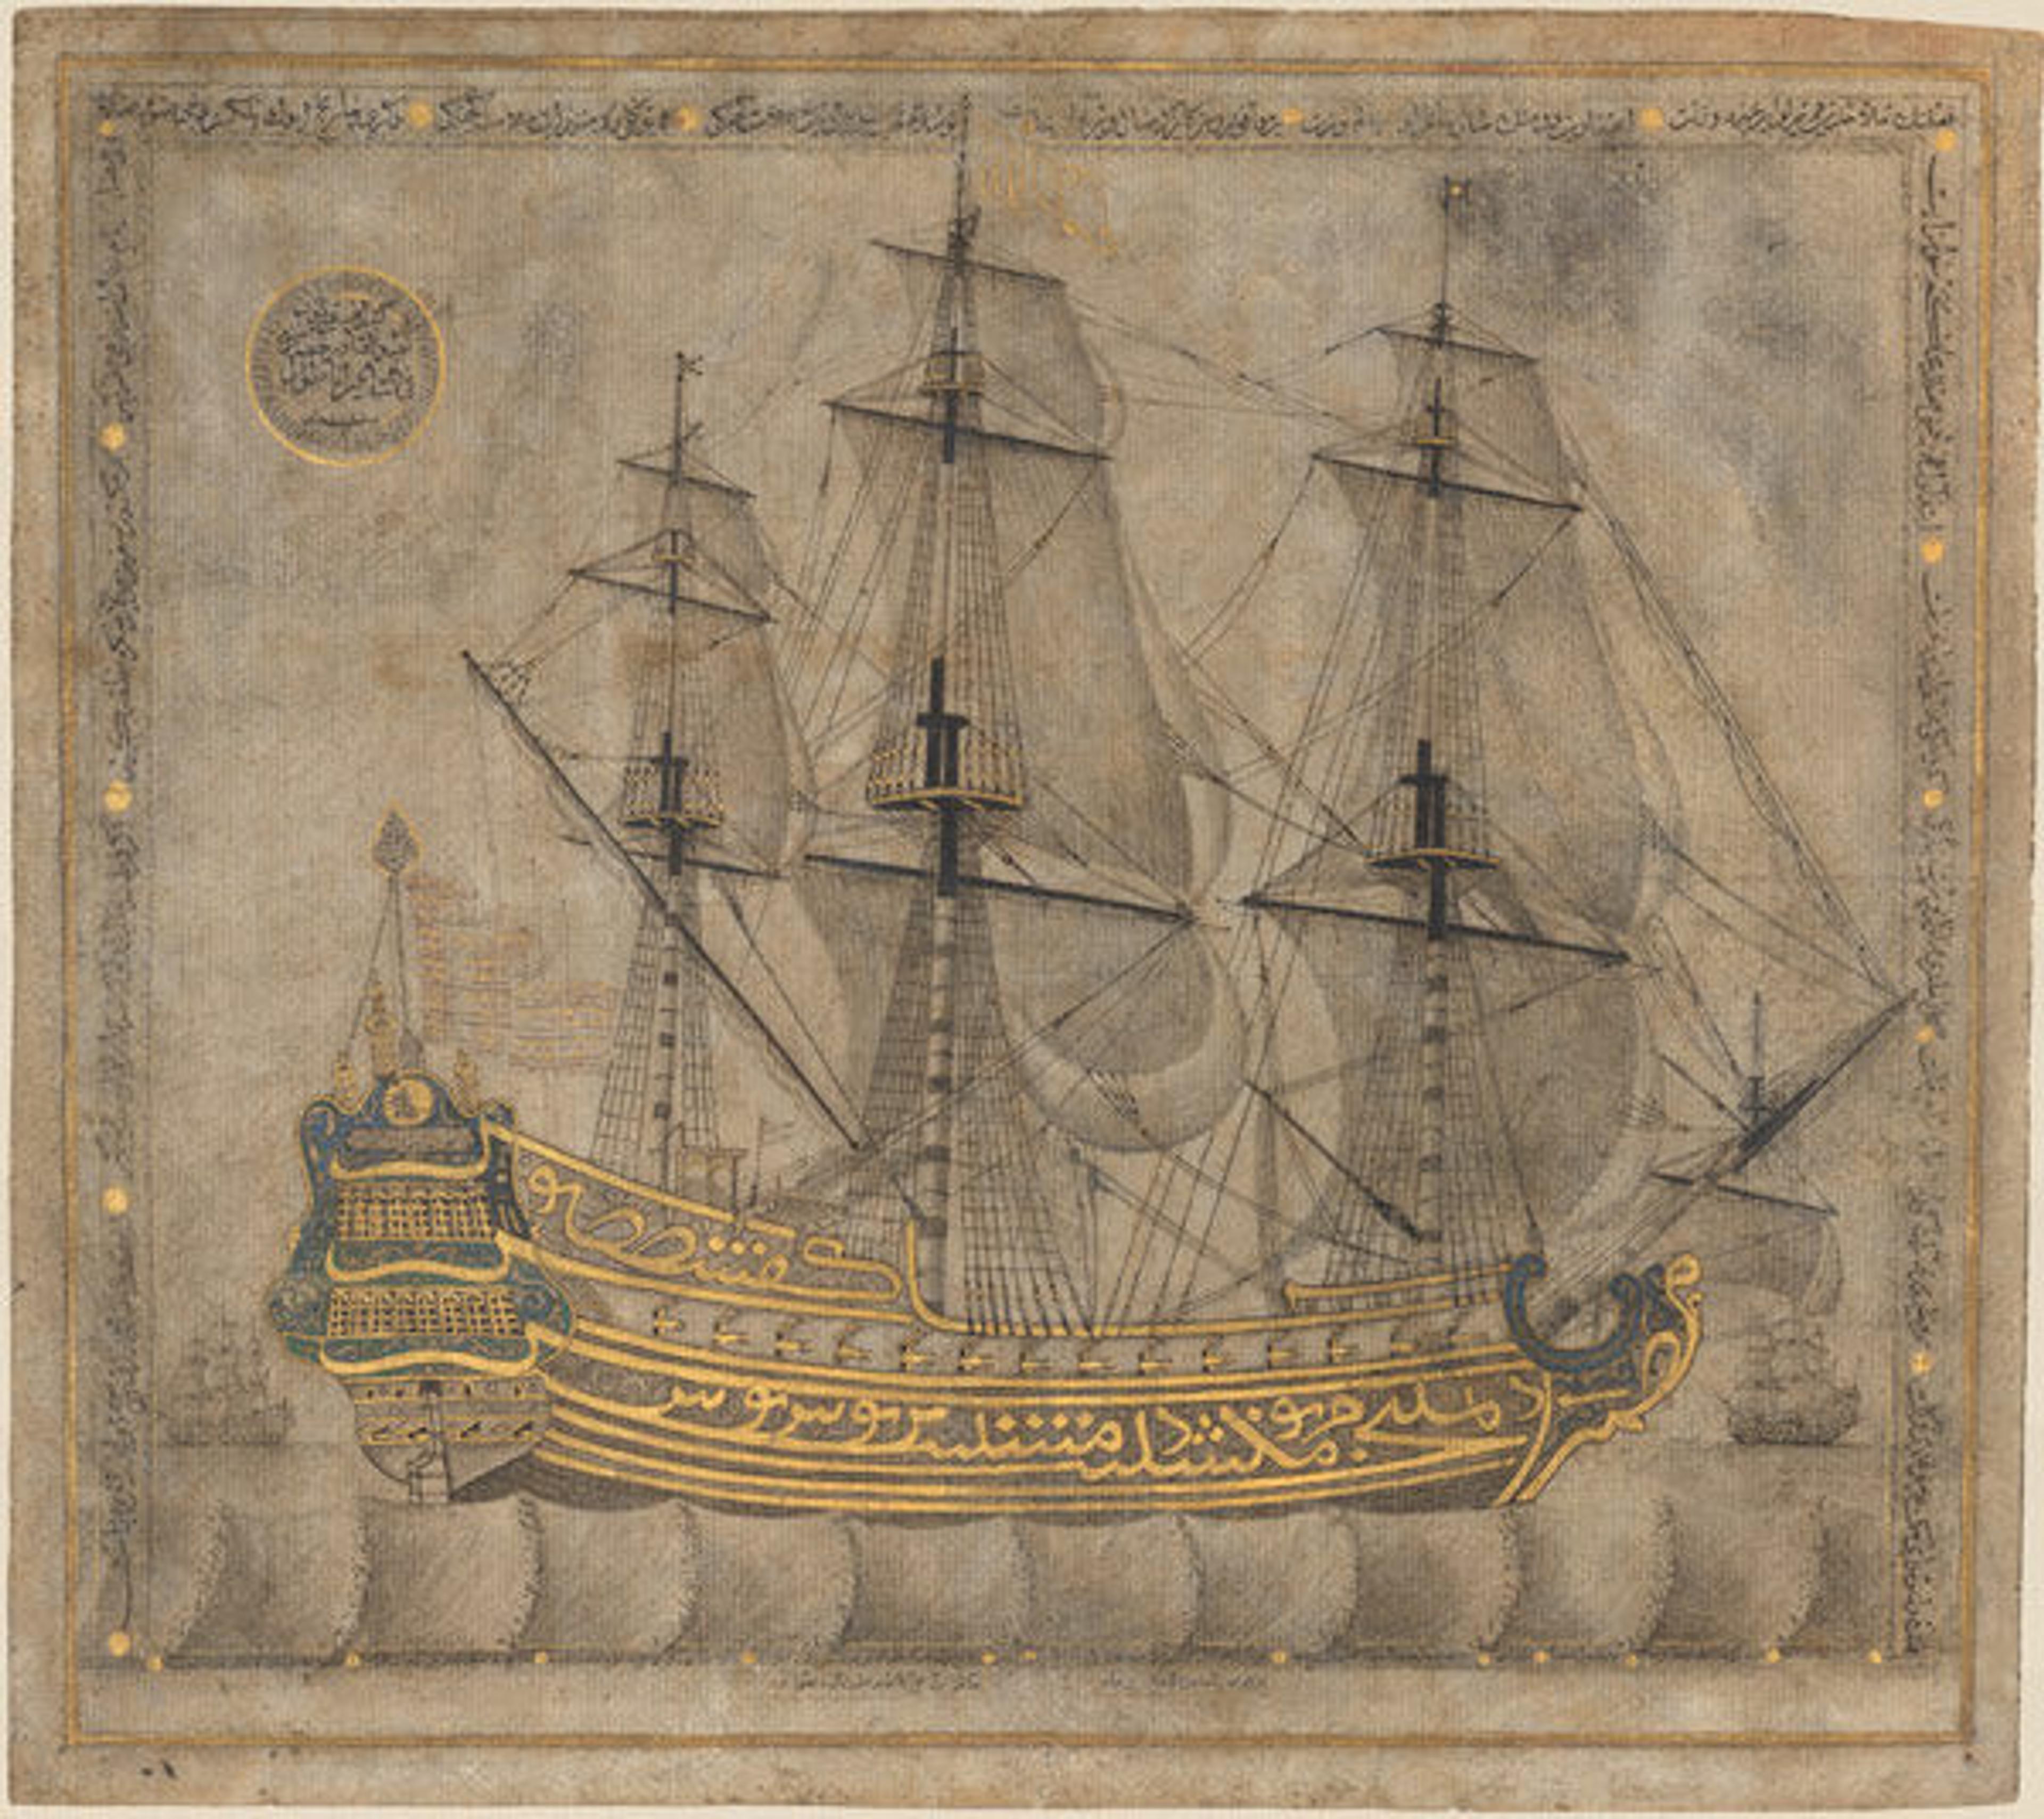 Calligraphic Galleon, A.H. 1180/ A.D. 1766–67. Calligrapher: 'Abd al-Qadir Hisari. 19 x 17 in (48.3 x 43.2 cm). The Metropolitan Museum of Art, New York, Louis E. and Theresa S. Seley Purchase Fund for Islamic Art and Rogers Fund, 2003 (2003.241)